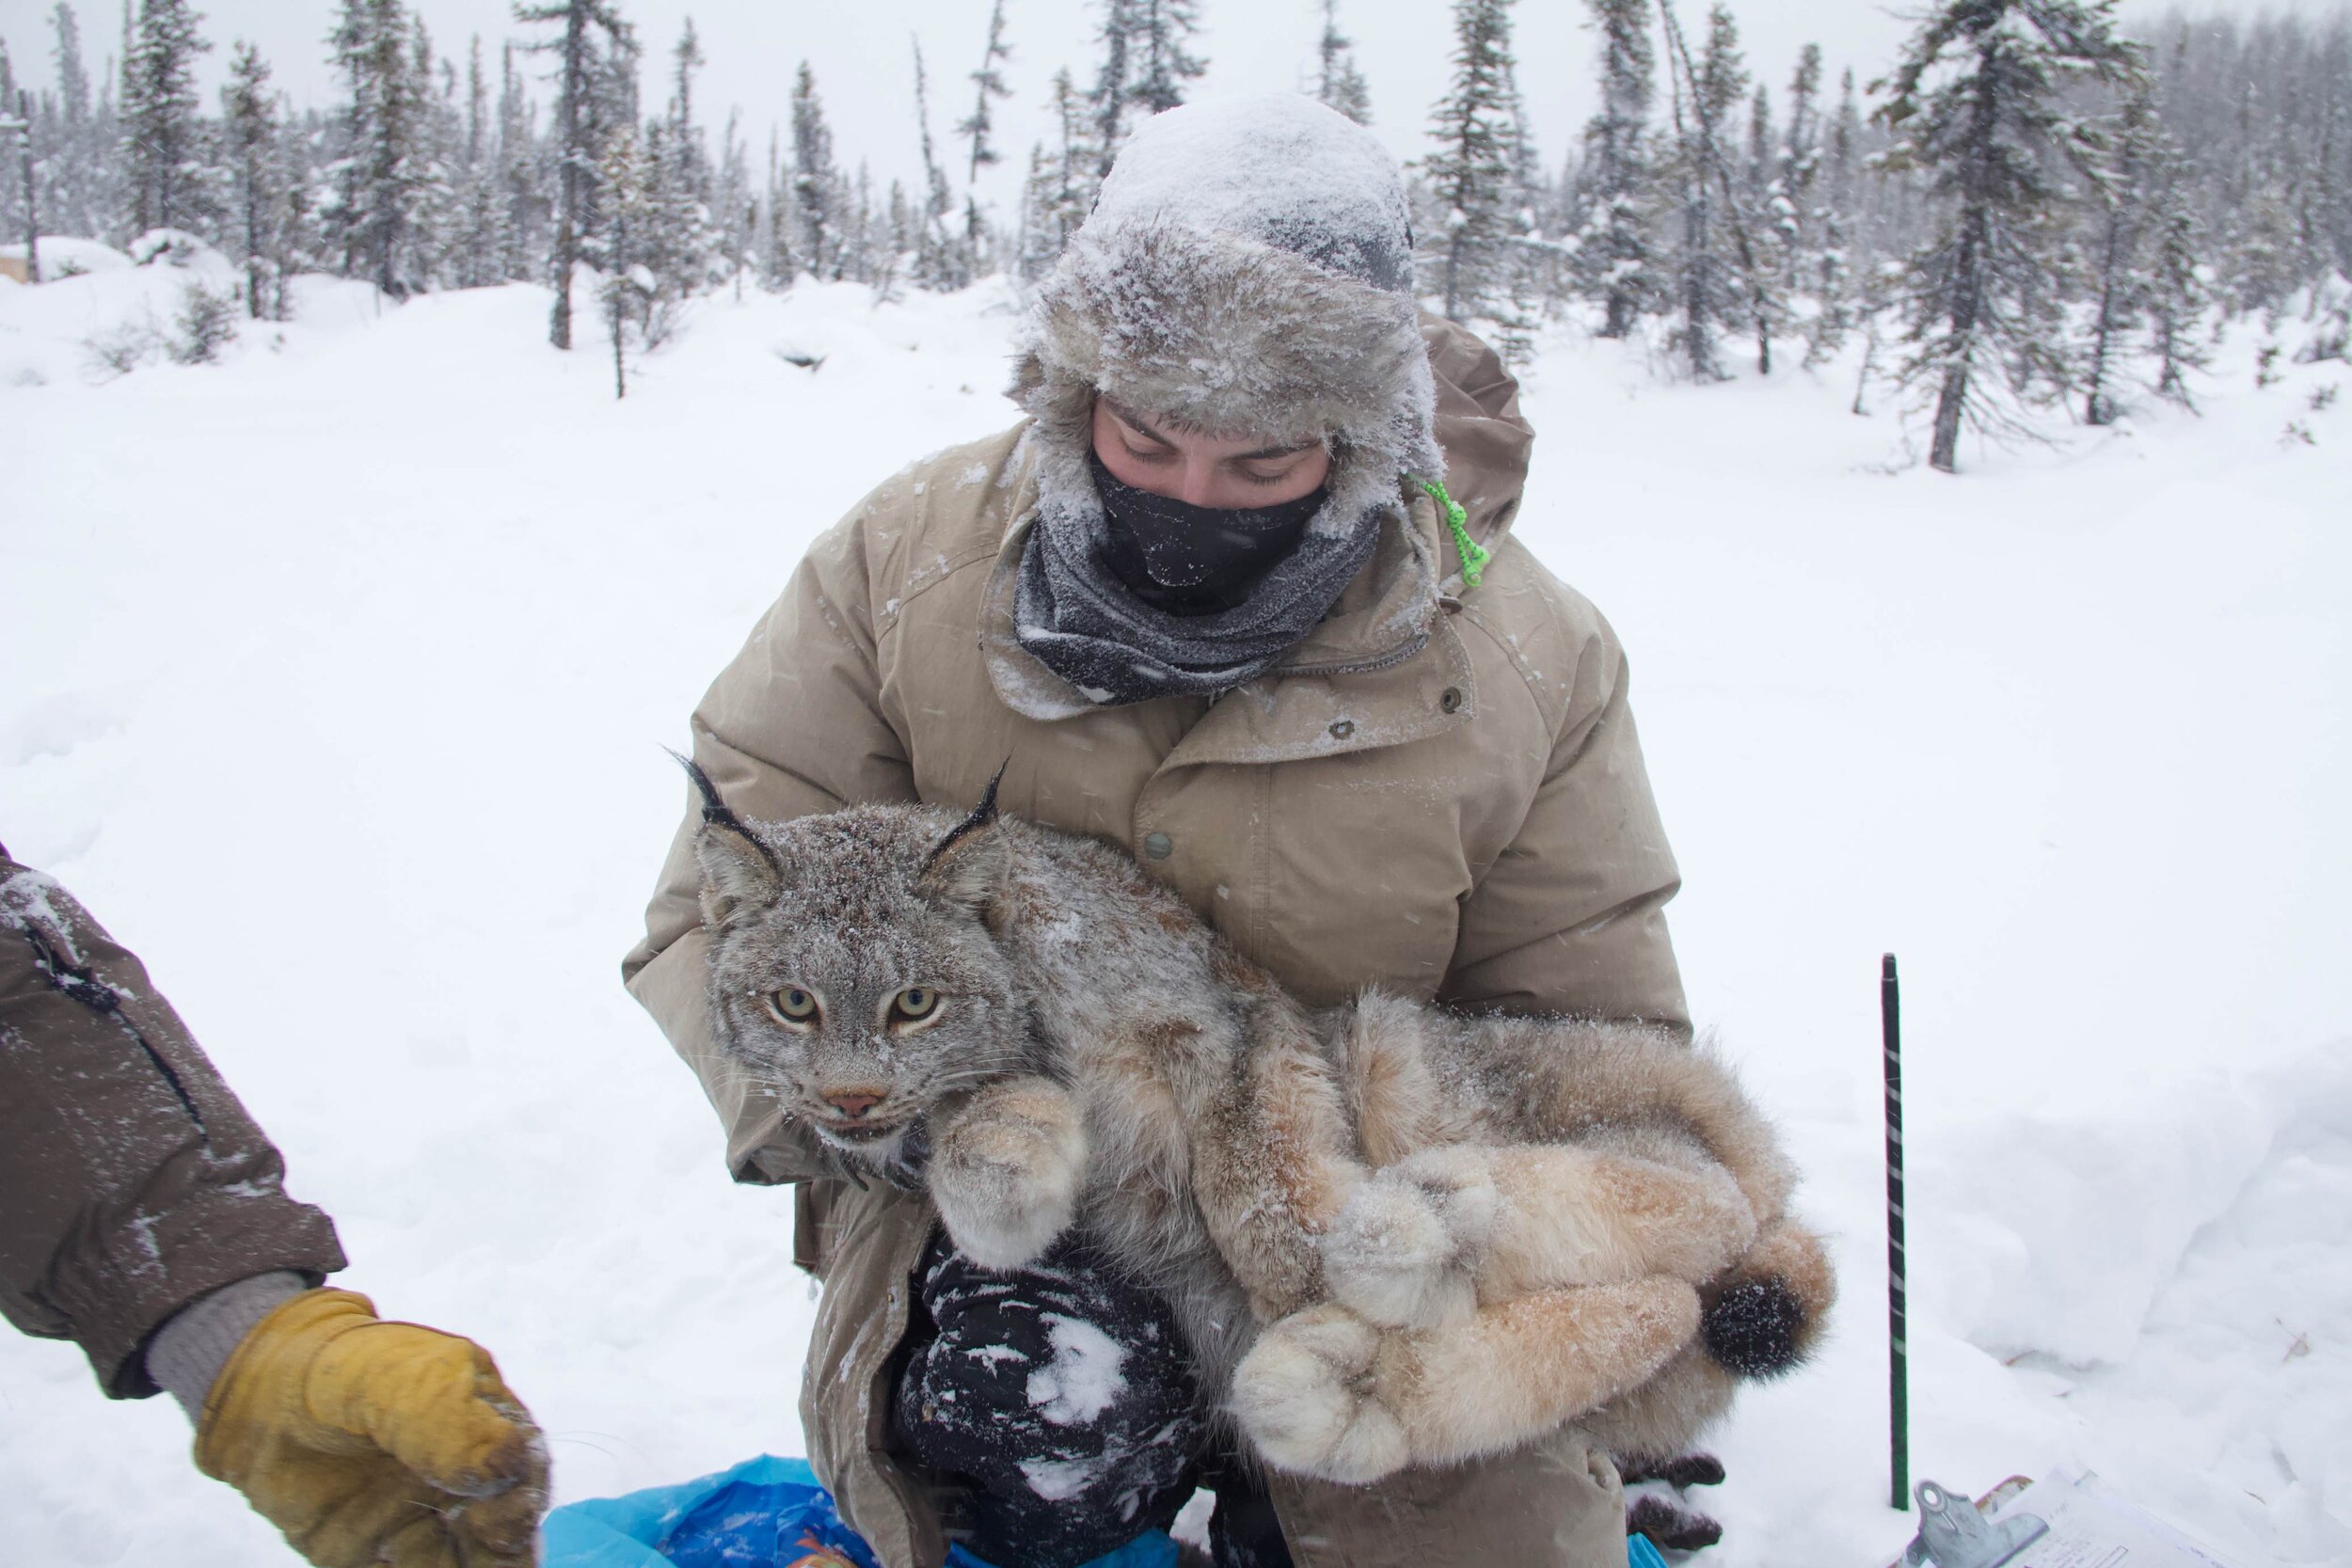  A biologist holds an anesthetized lynx after collaring her. The lynx was safely released and biologists can now track her movements.  